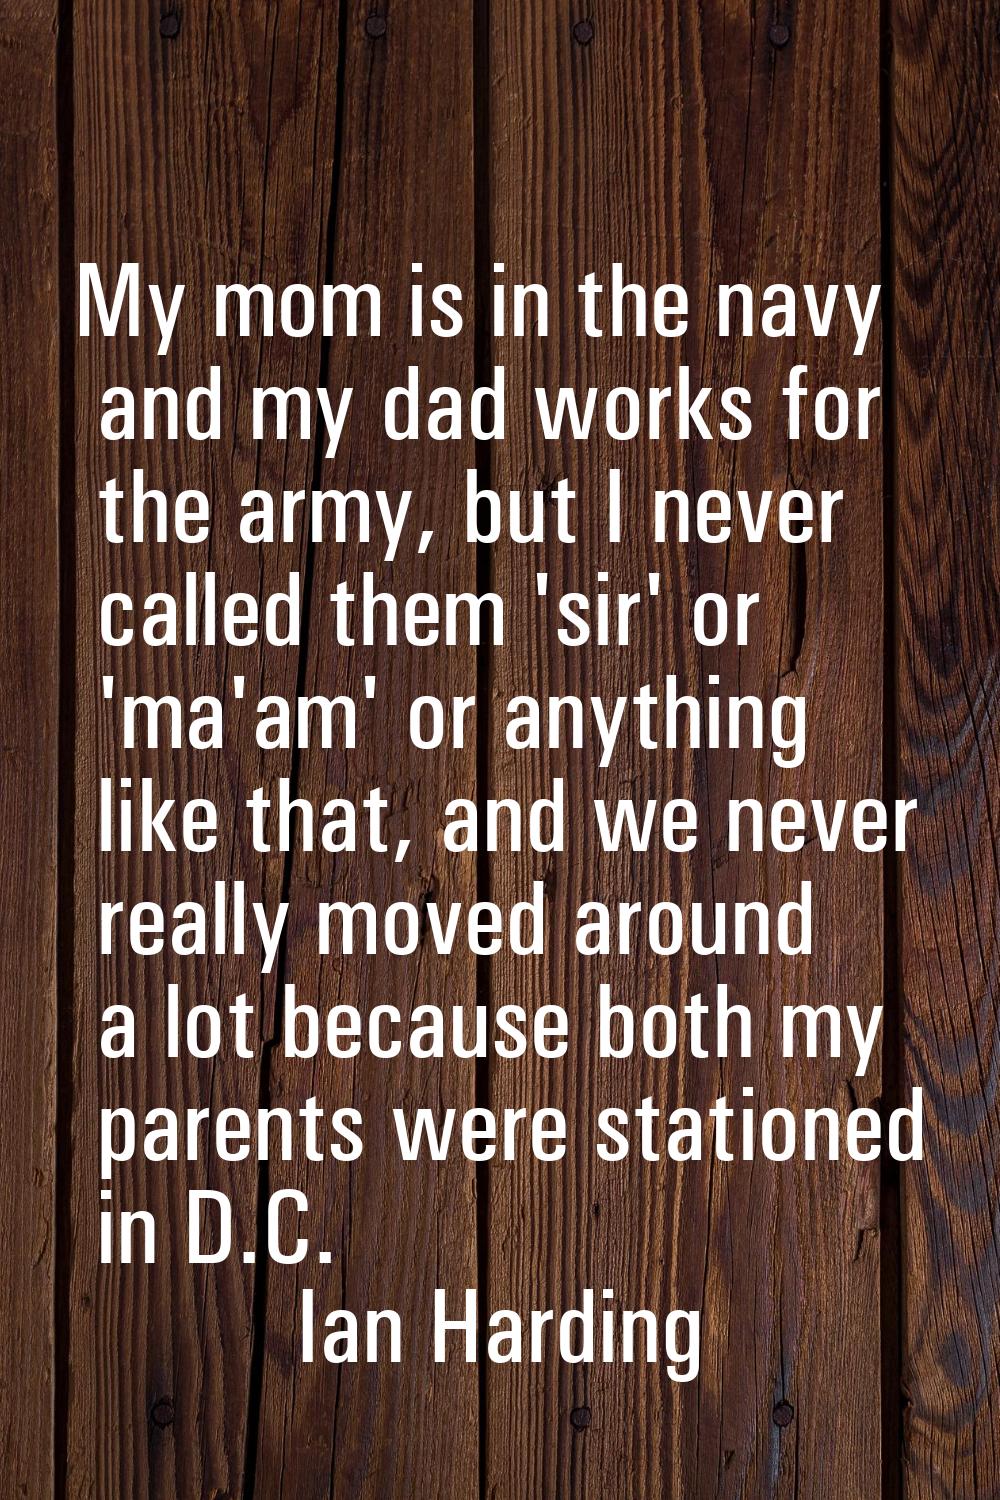 My mom is in the navy and my dad works for the army, but I never called them 'sir' or 'ma'am' or an